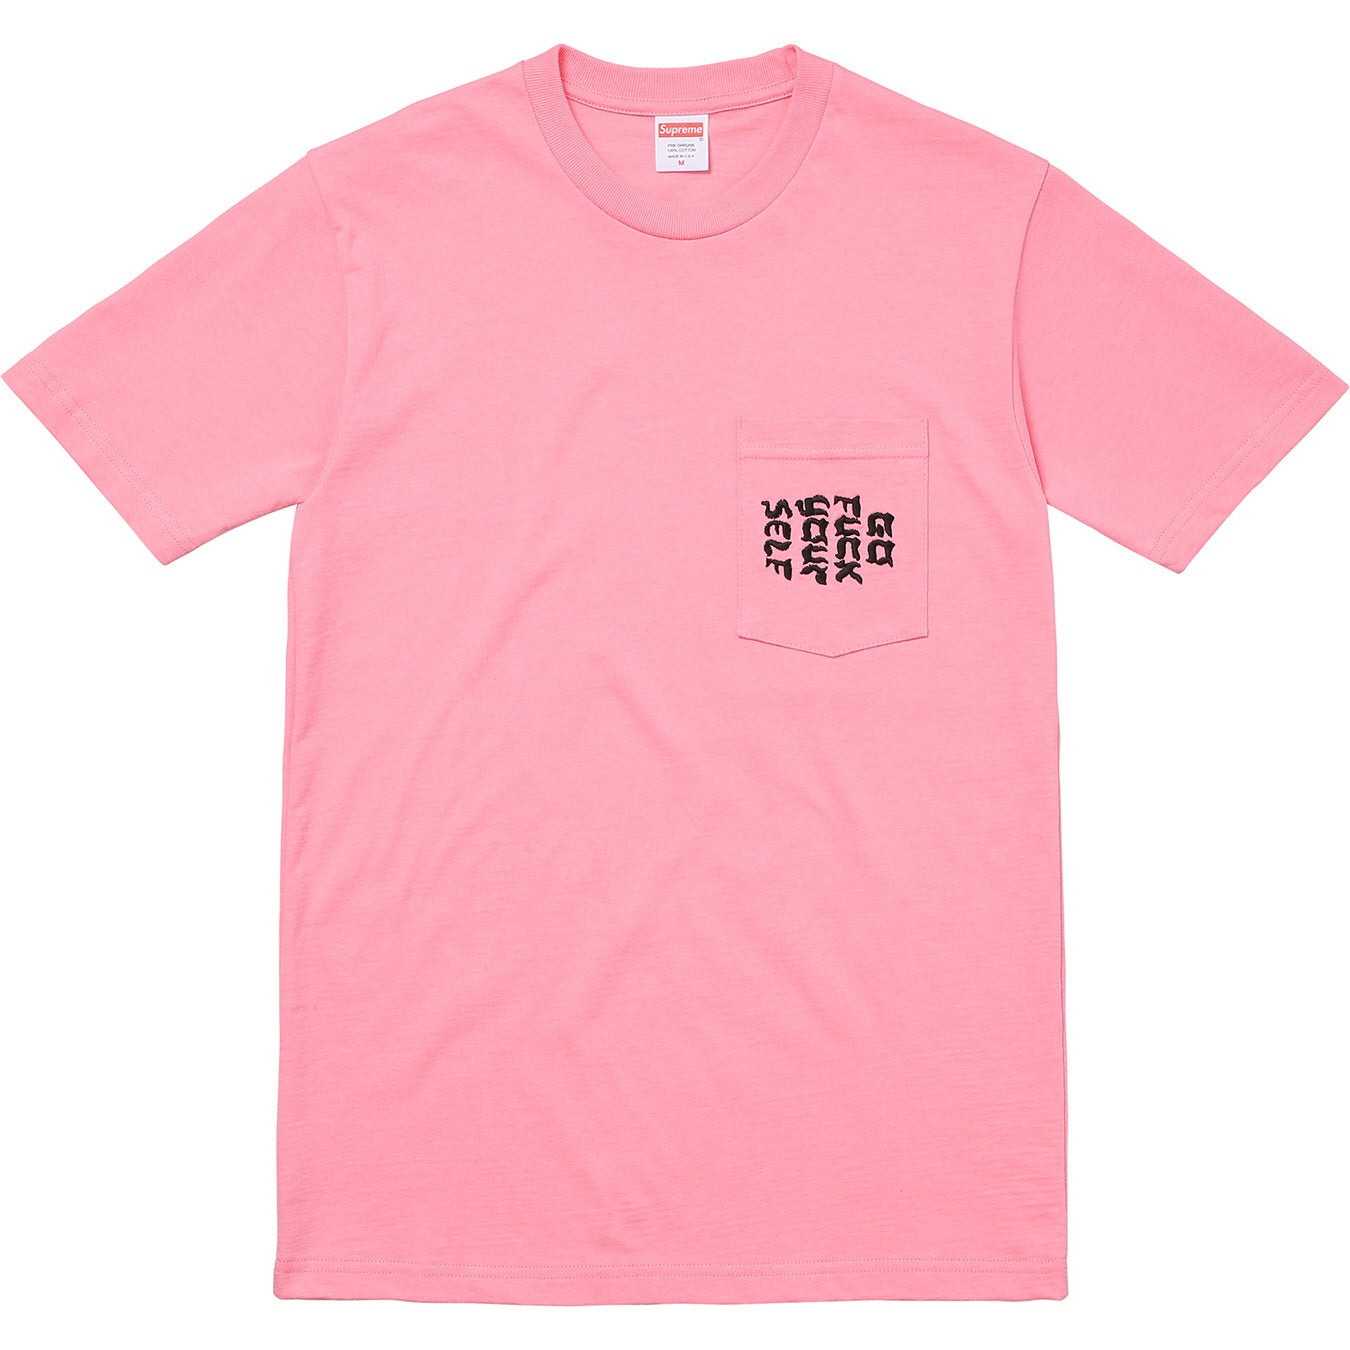 Supreme Tee "Go F Yourself" Pink - Centrall Online